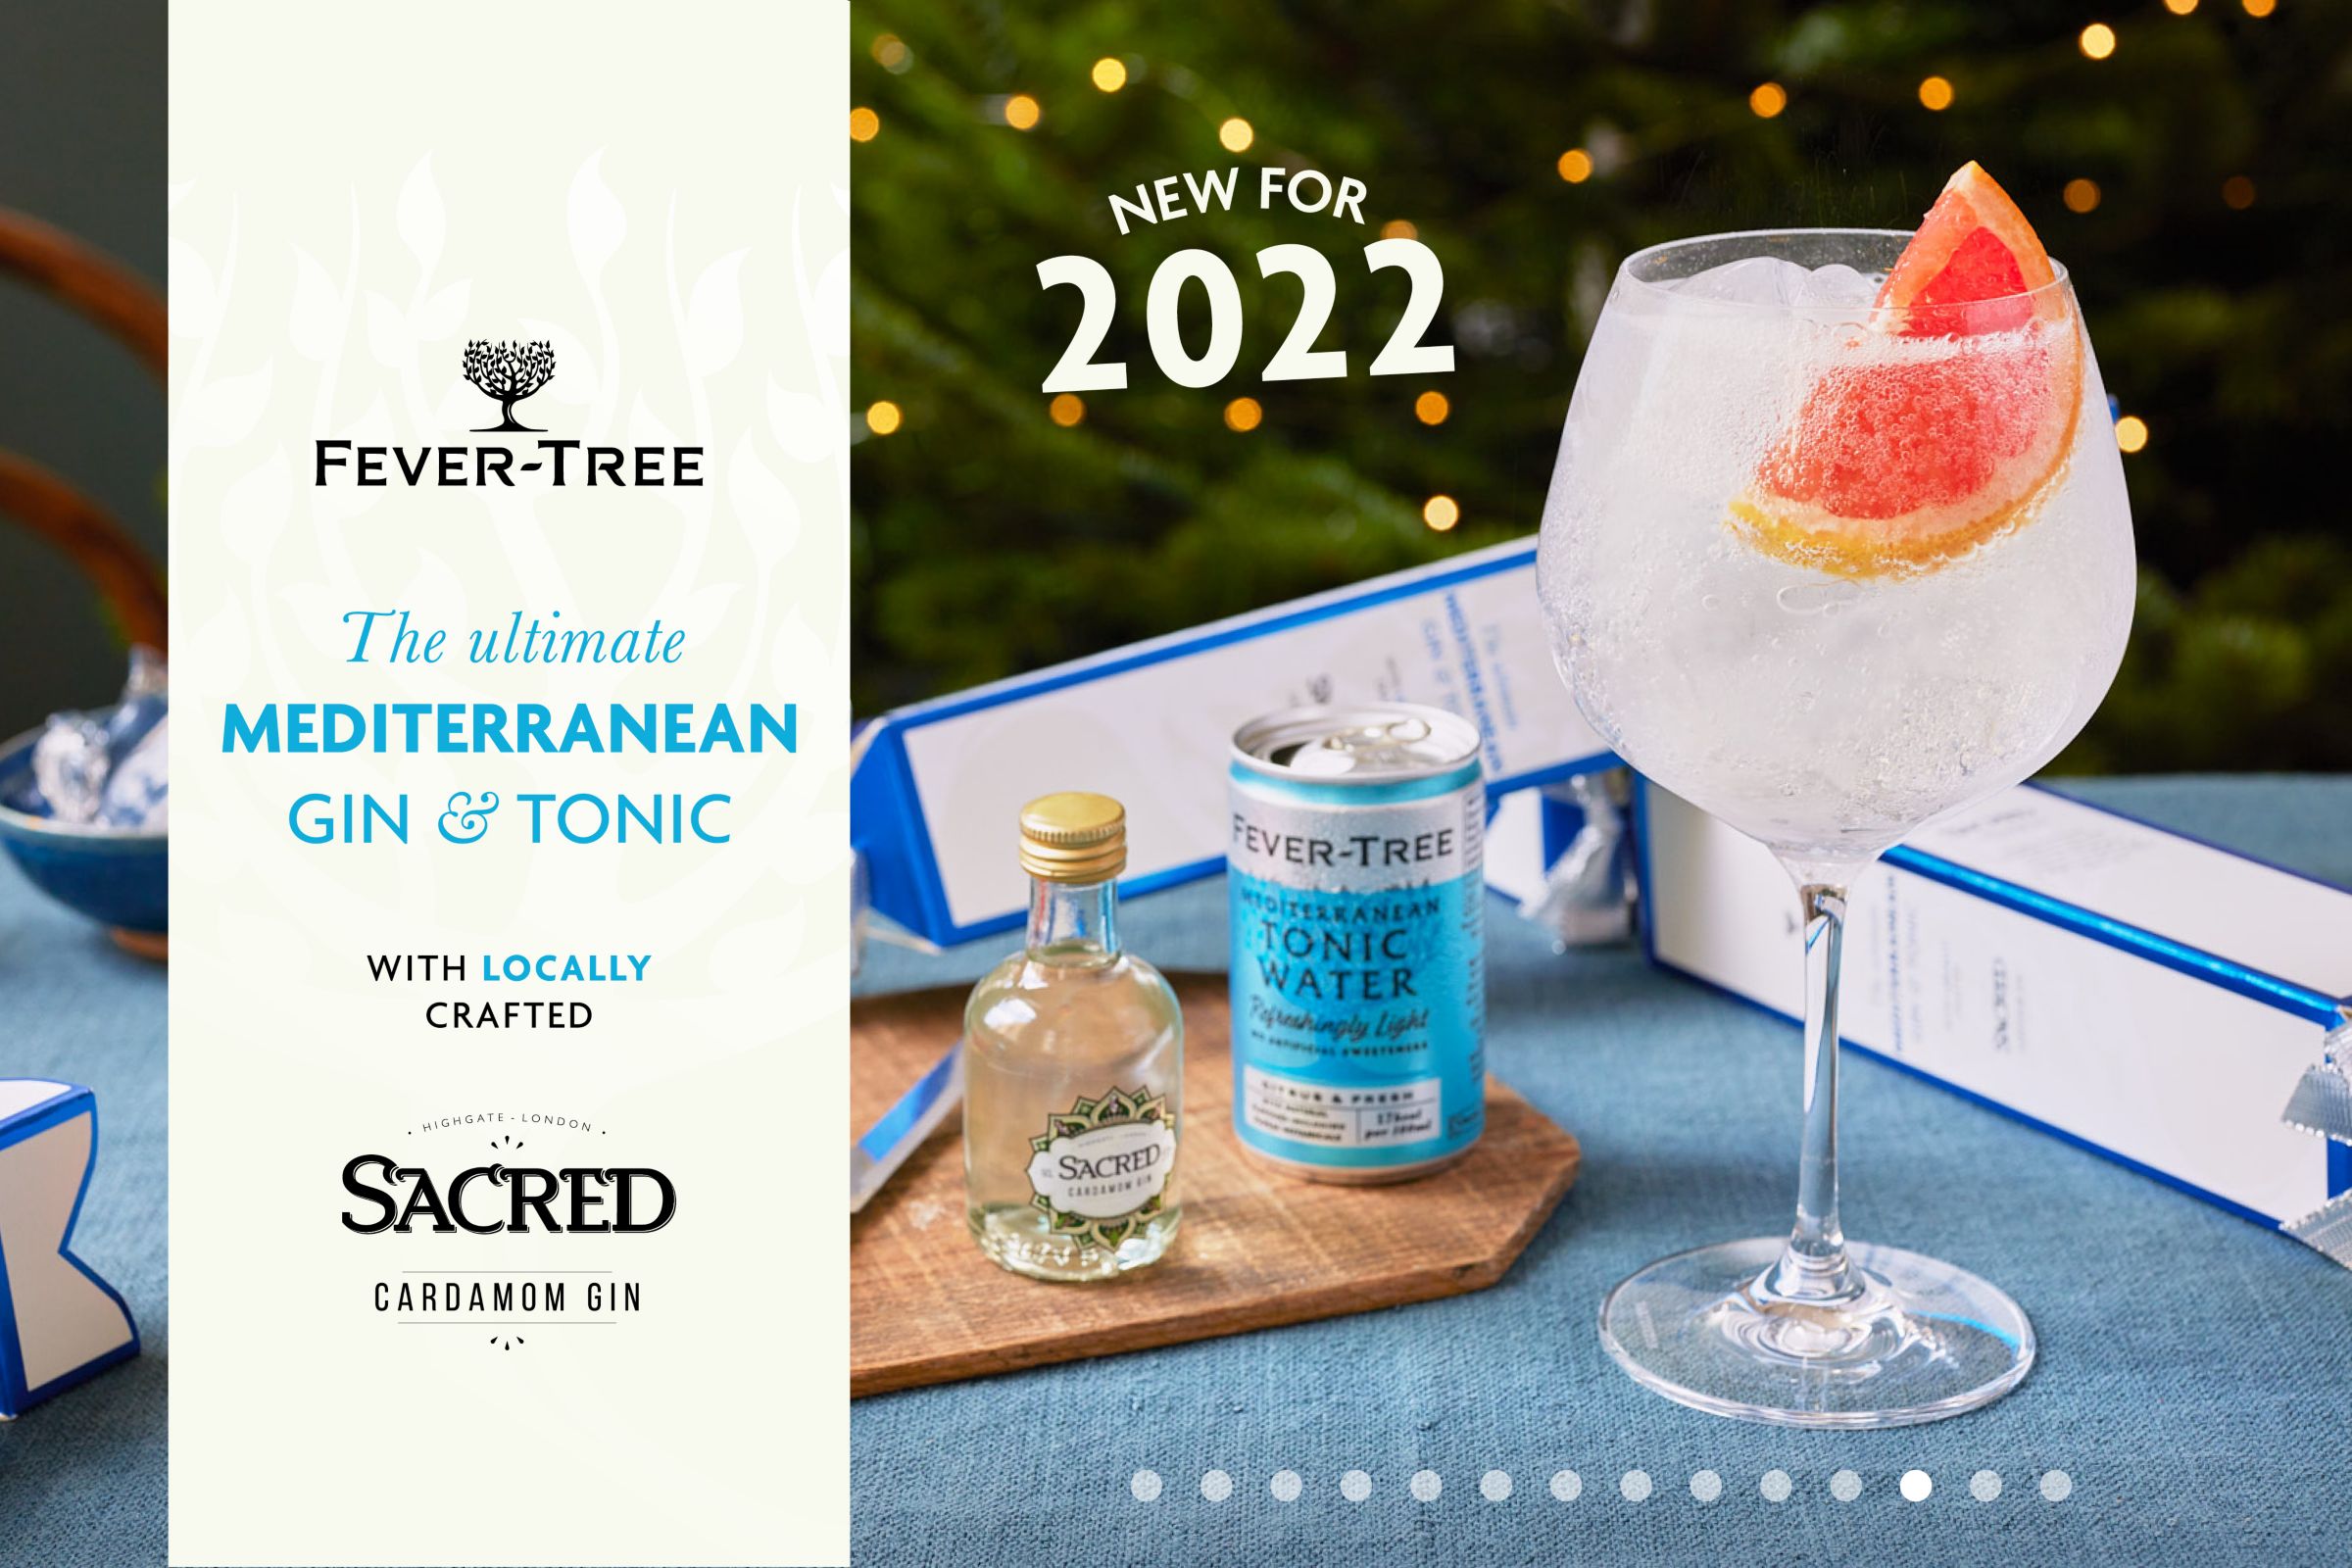 Buy Fever-Tree Gin and Tonic Pairing Crackers, Box of 4, 5cl & 150ml Online at johnlewis.com Buy Fever-Tree Gin and Tonic Pairing Crackers, Box of 4, 5cl & 150ml Online at johnlewis.com Buy Fever-Tree Gin and Tonic Pairing Crackers, Box of 4, 5cl & 150ml Online at johnlewis.com Buy Fever-Tree Gin and Tonic Pairing Crackers, Box of 4, 5cl & 150ml Online at johnlewis.com Buy Fever-Tree Gin and Tonic Pairing Crackers, Box of 4, 5cl & 150ml Online at johnlewis.com Fever-Tree Gin and Tonic Pairing Crackers, Box of 4, 5cl & 150ml